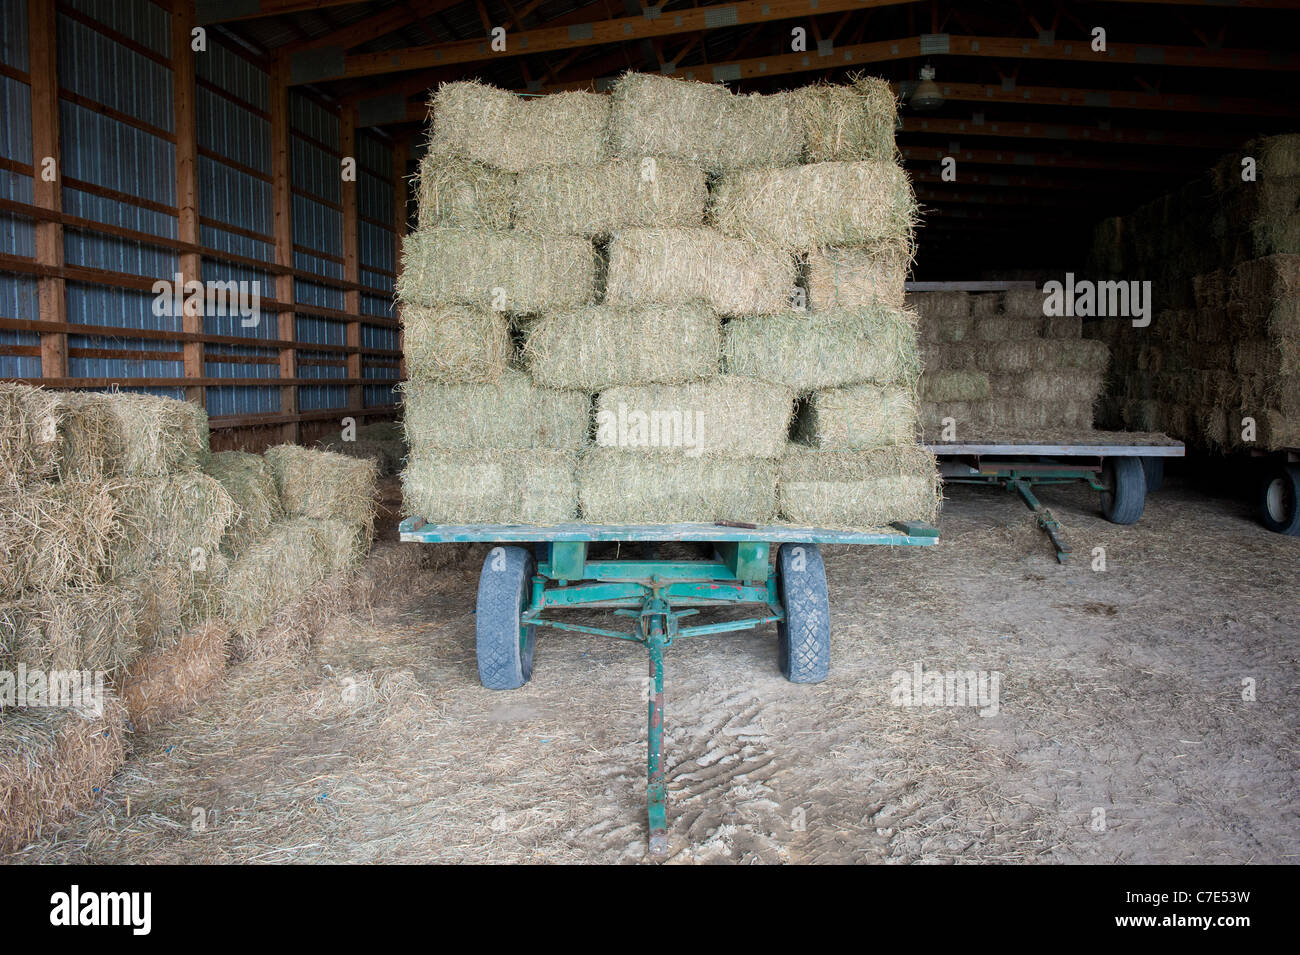 Stacks of hay bales on a wagon in a barn Stock Photo